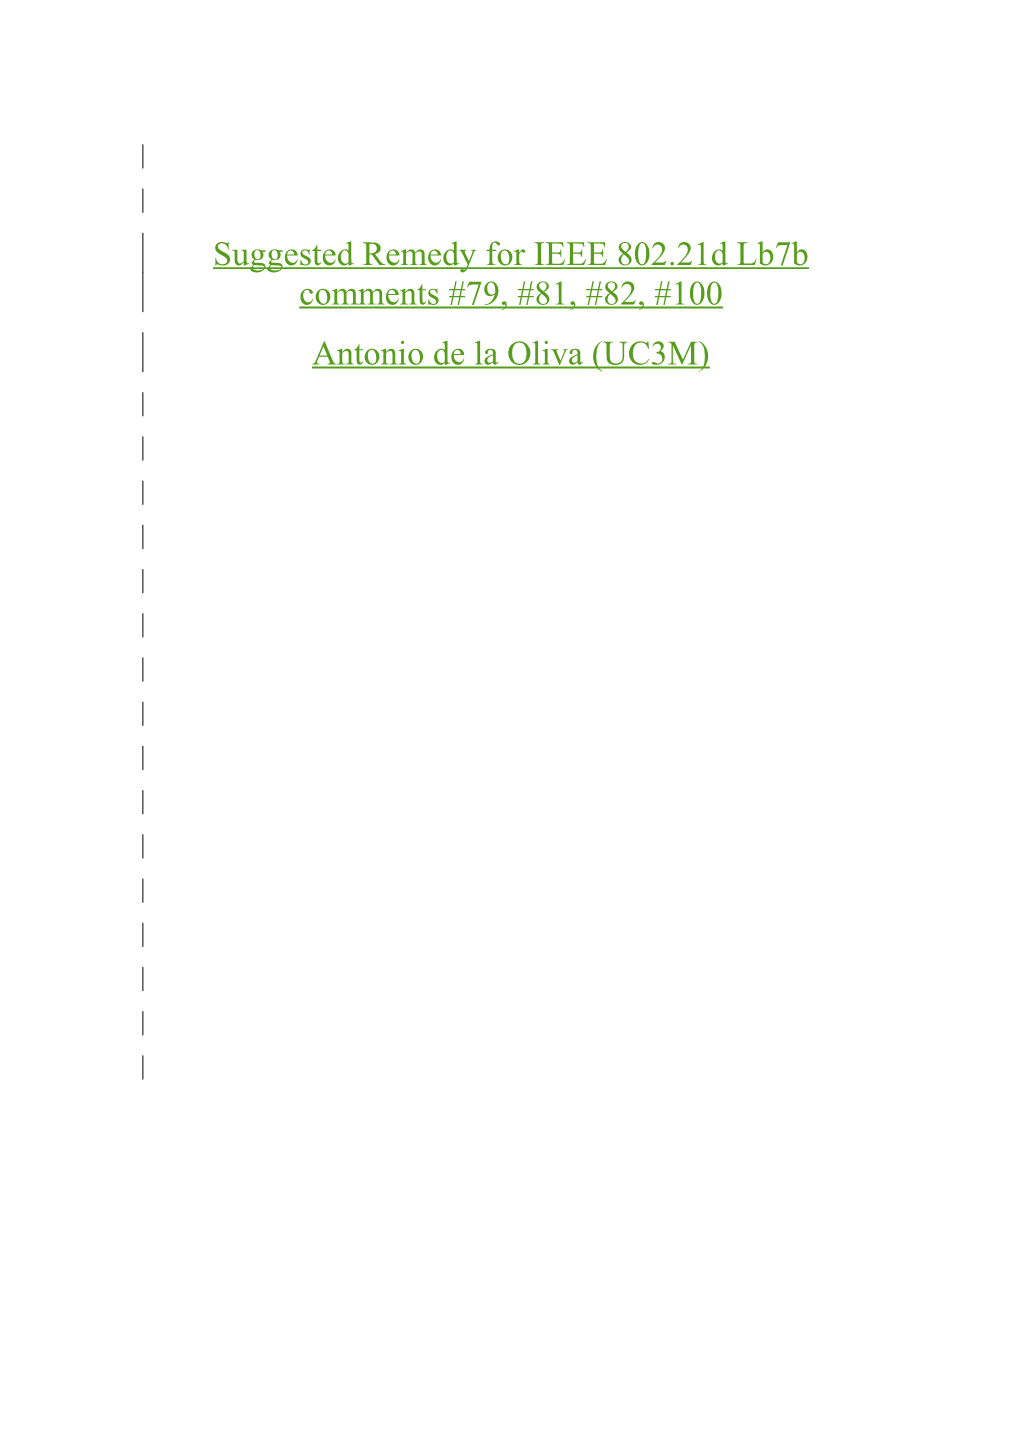 7.4.1.1.3 Suggested Remedy for IEEE 802.21D Lb7b Comments #79, #81, #82, #100